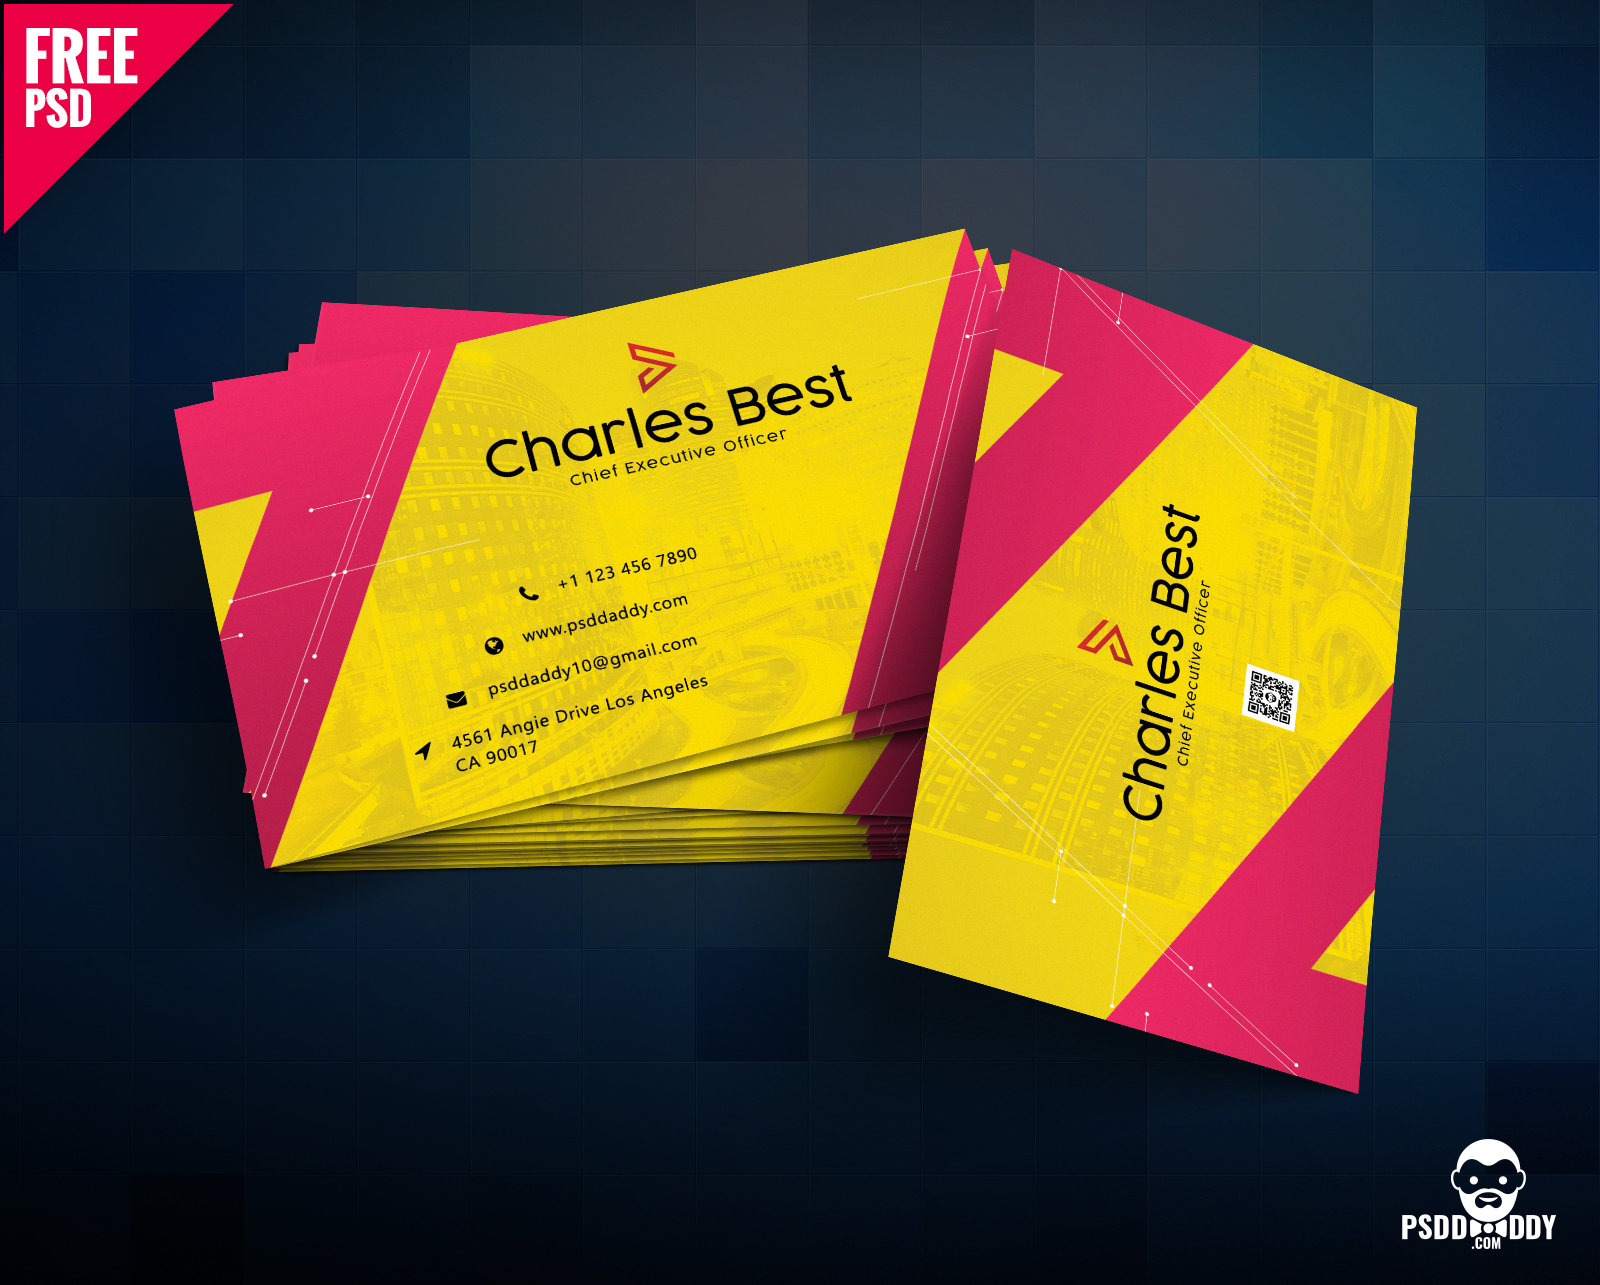 Download] Creative Business Card Free Psd | Psddaddy In Visiting Card Template Psd Free Download